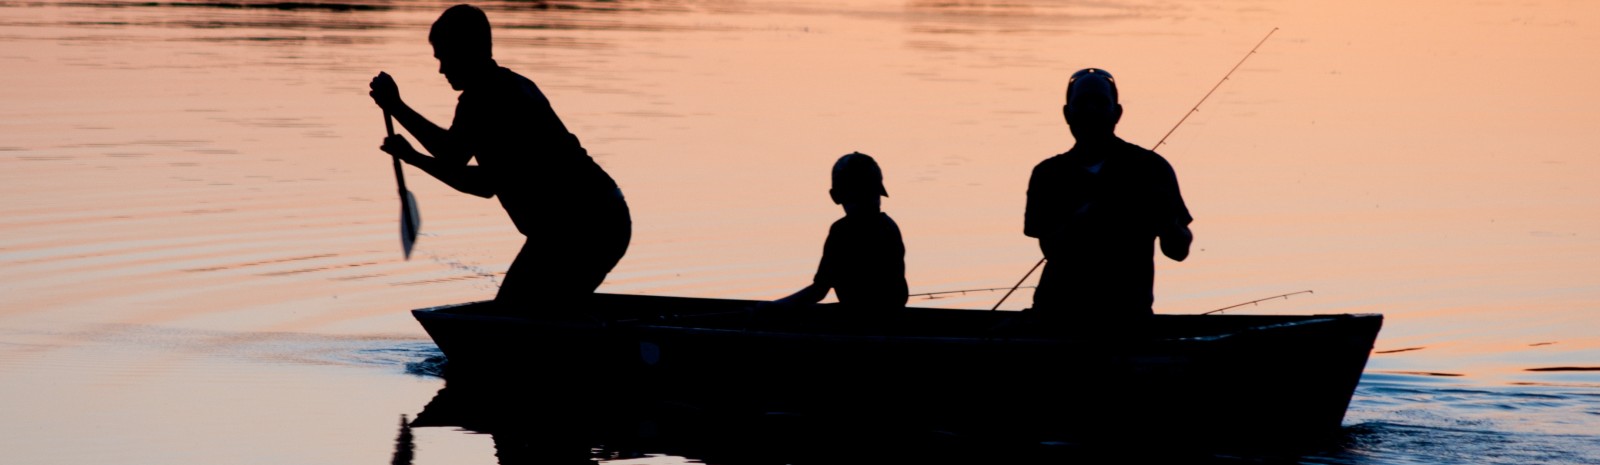 Young boy fishing at dusk with family.